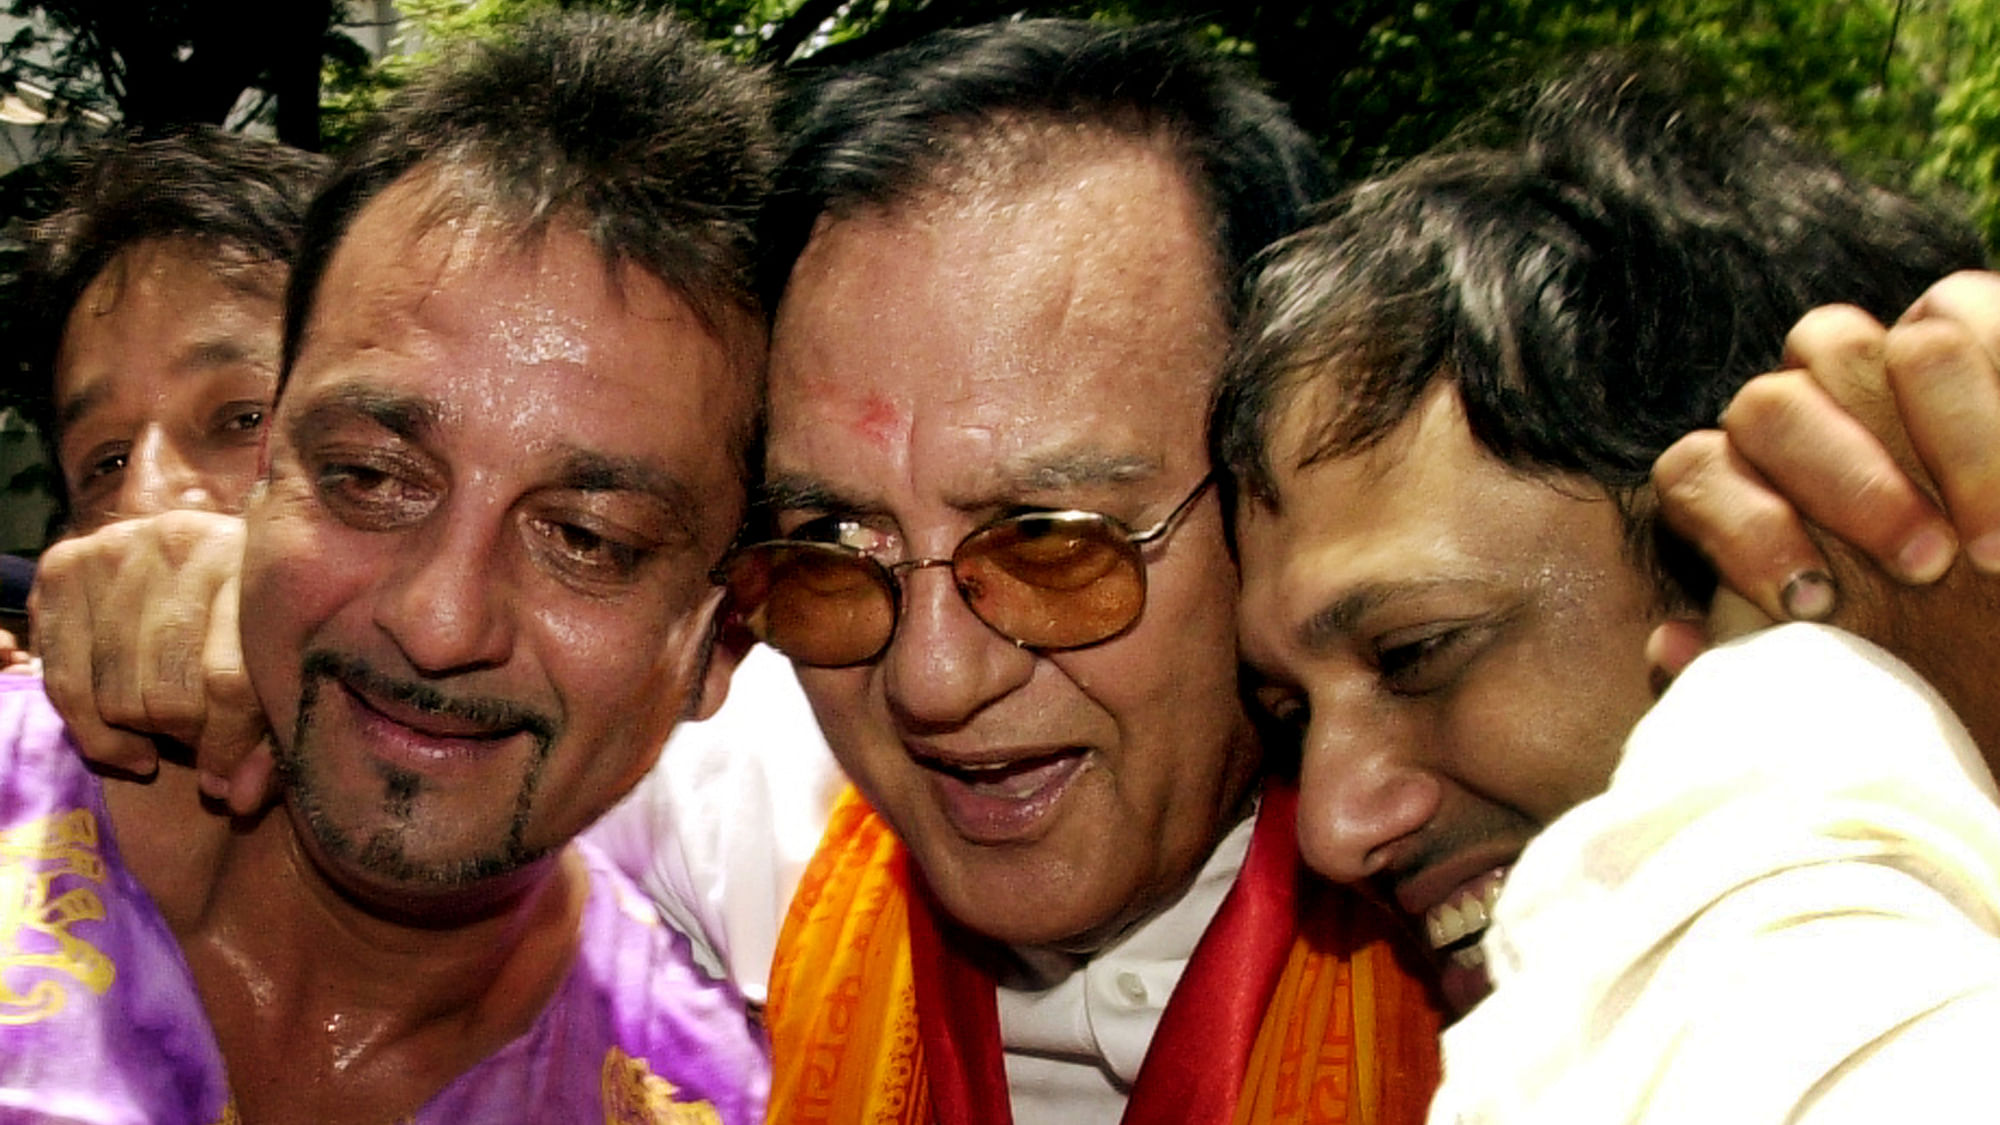 Bollywood legend Sunil Dutt flanked by son Sanjay Dutt (L) and Bollywood colleague Govinda (R) after the parliamentary elections, 2004.&nbsp;